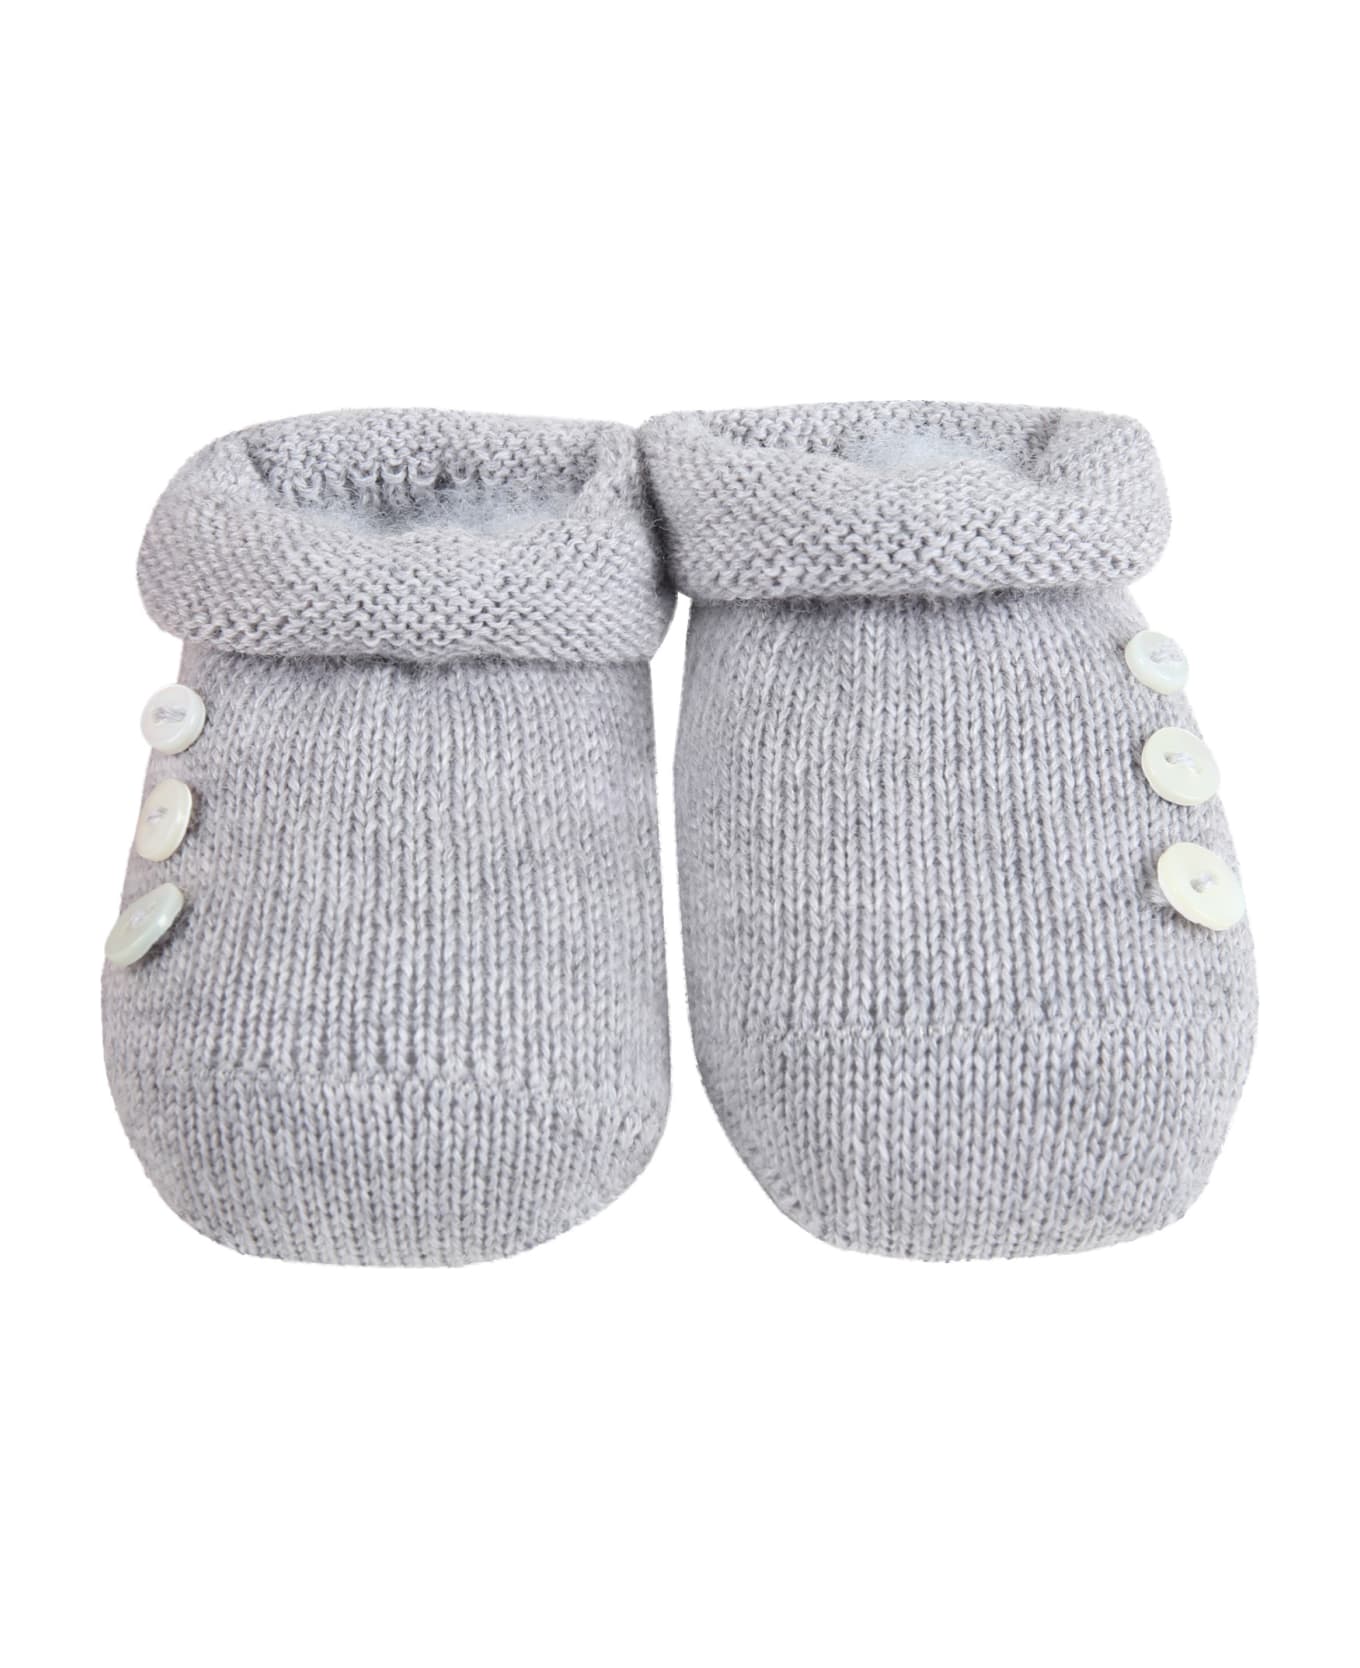 Story Loris Gray Baby-bootee For Babies - Grey アクセサリー＆ギフト